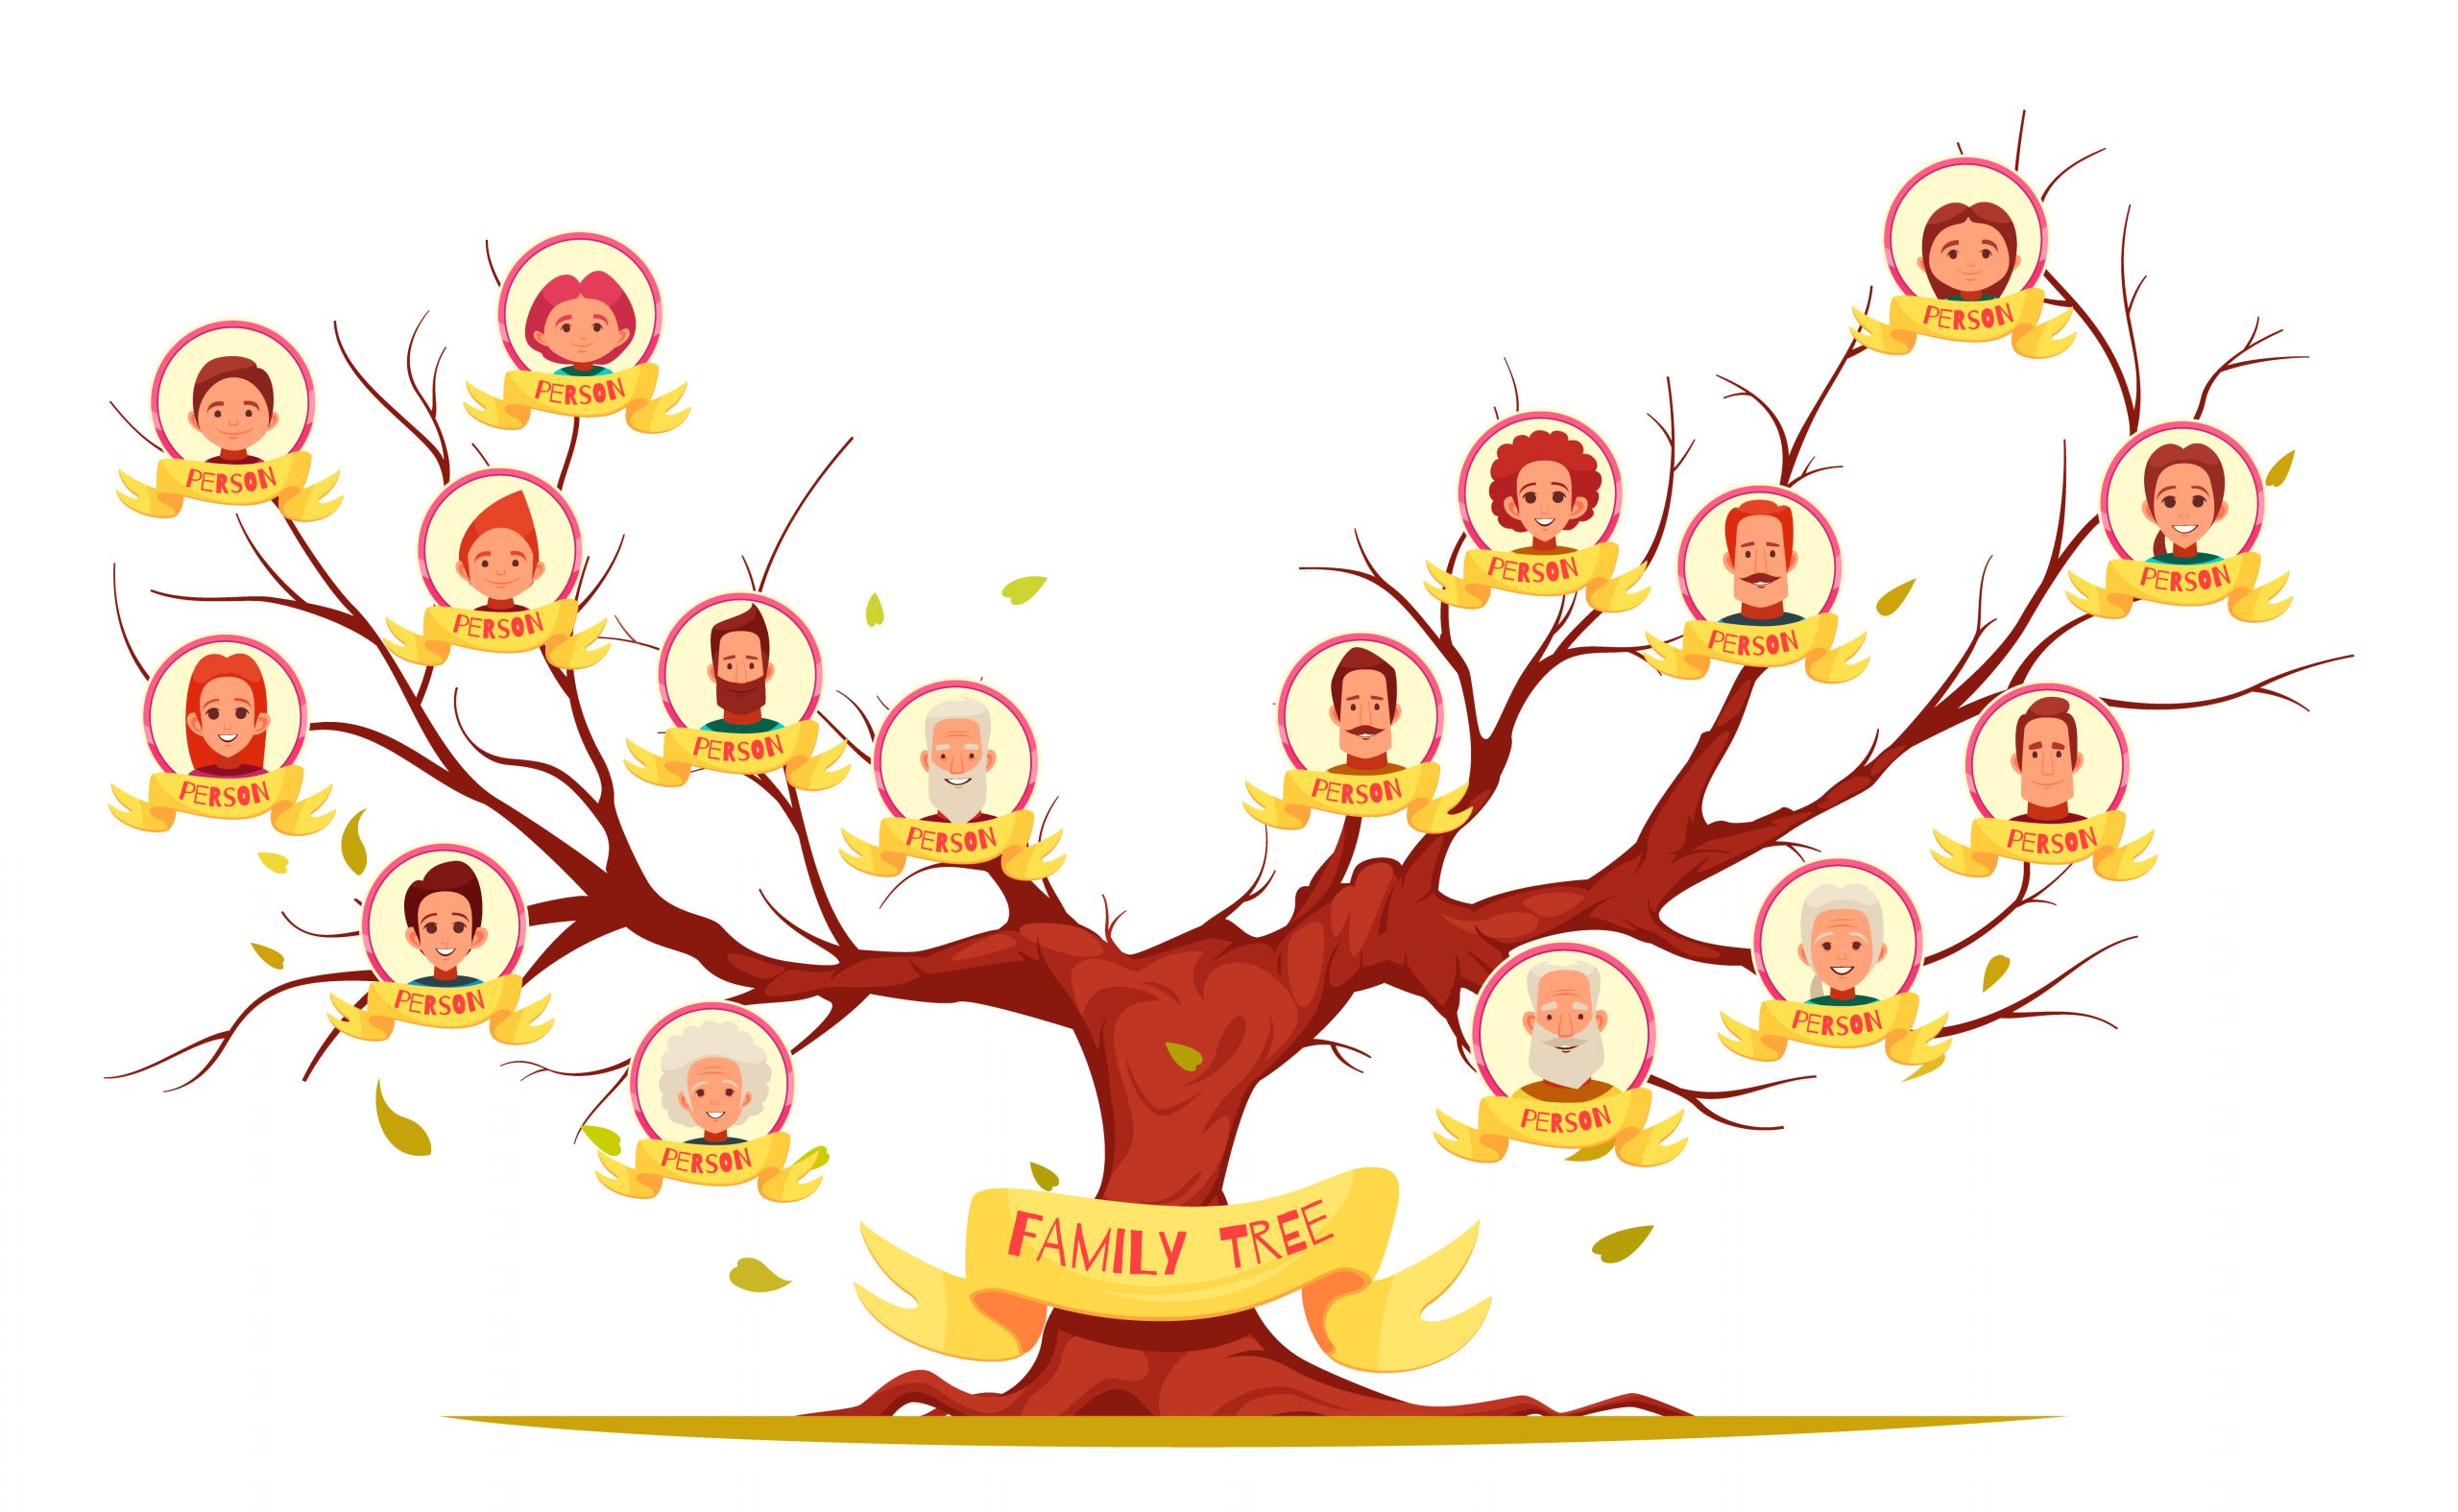 Image shows a drawn family tree with cartoon-like pictures of family members on the branches